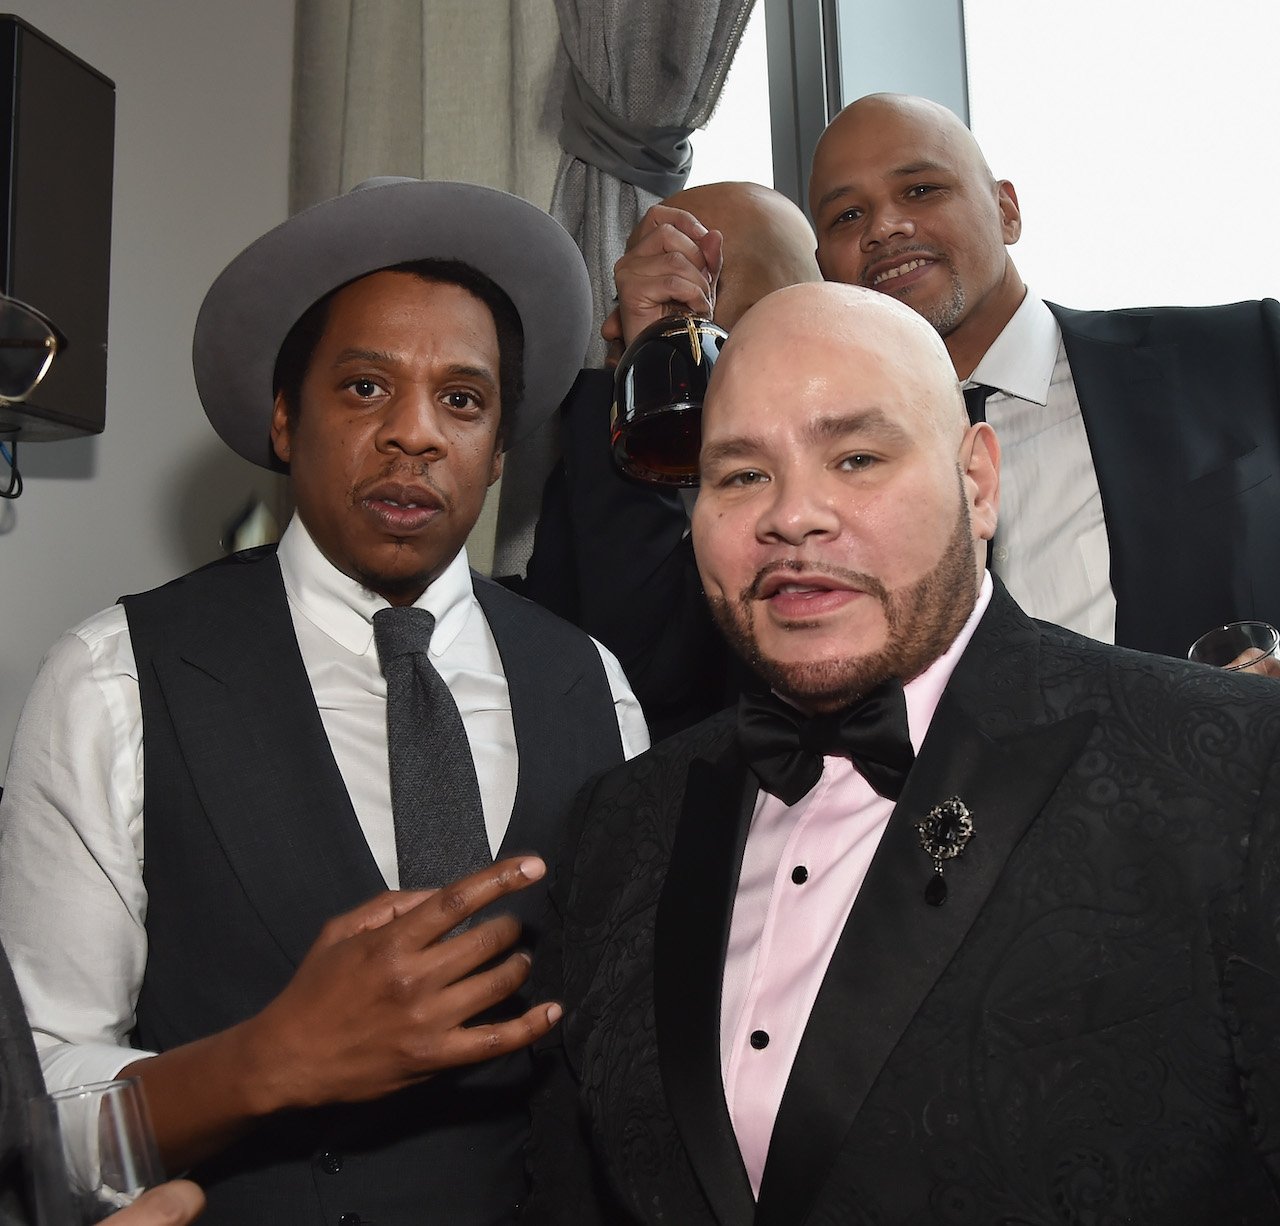 Jay-Z and Fat Joe pose for photo